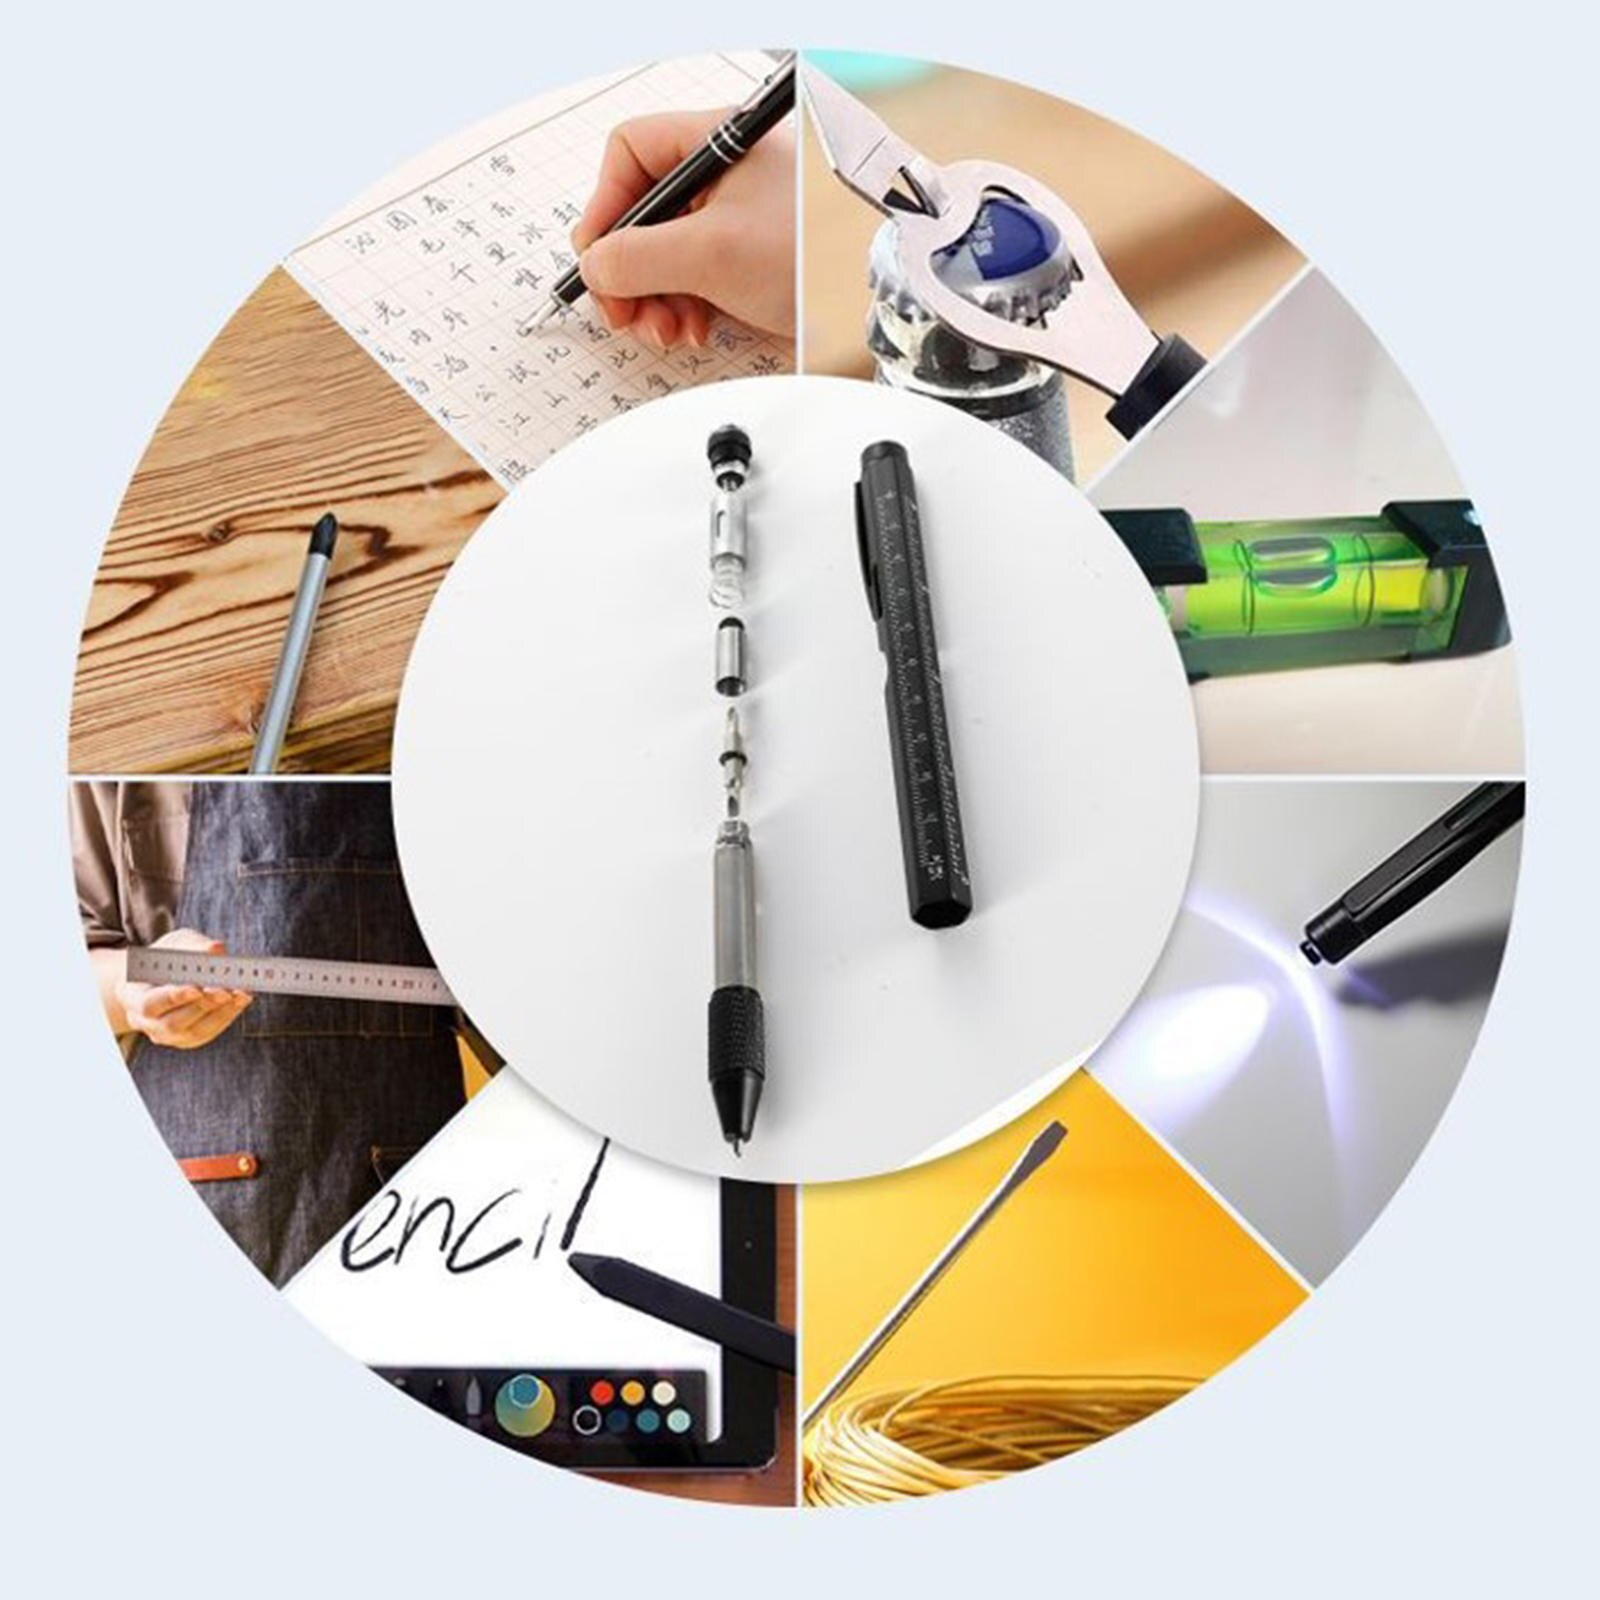 9 in 1 Multifunctional Pen Creative Christmas Gifts for Men Dad Father Boyfriend Husband